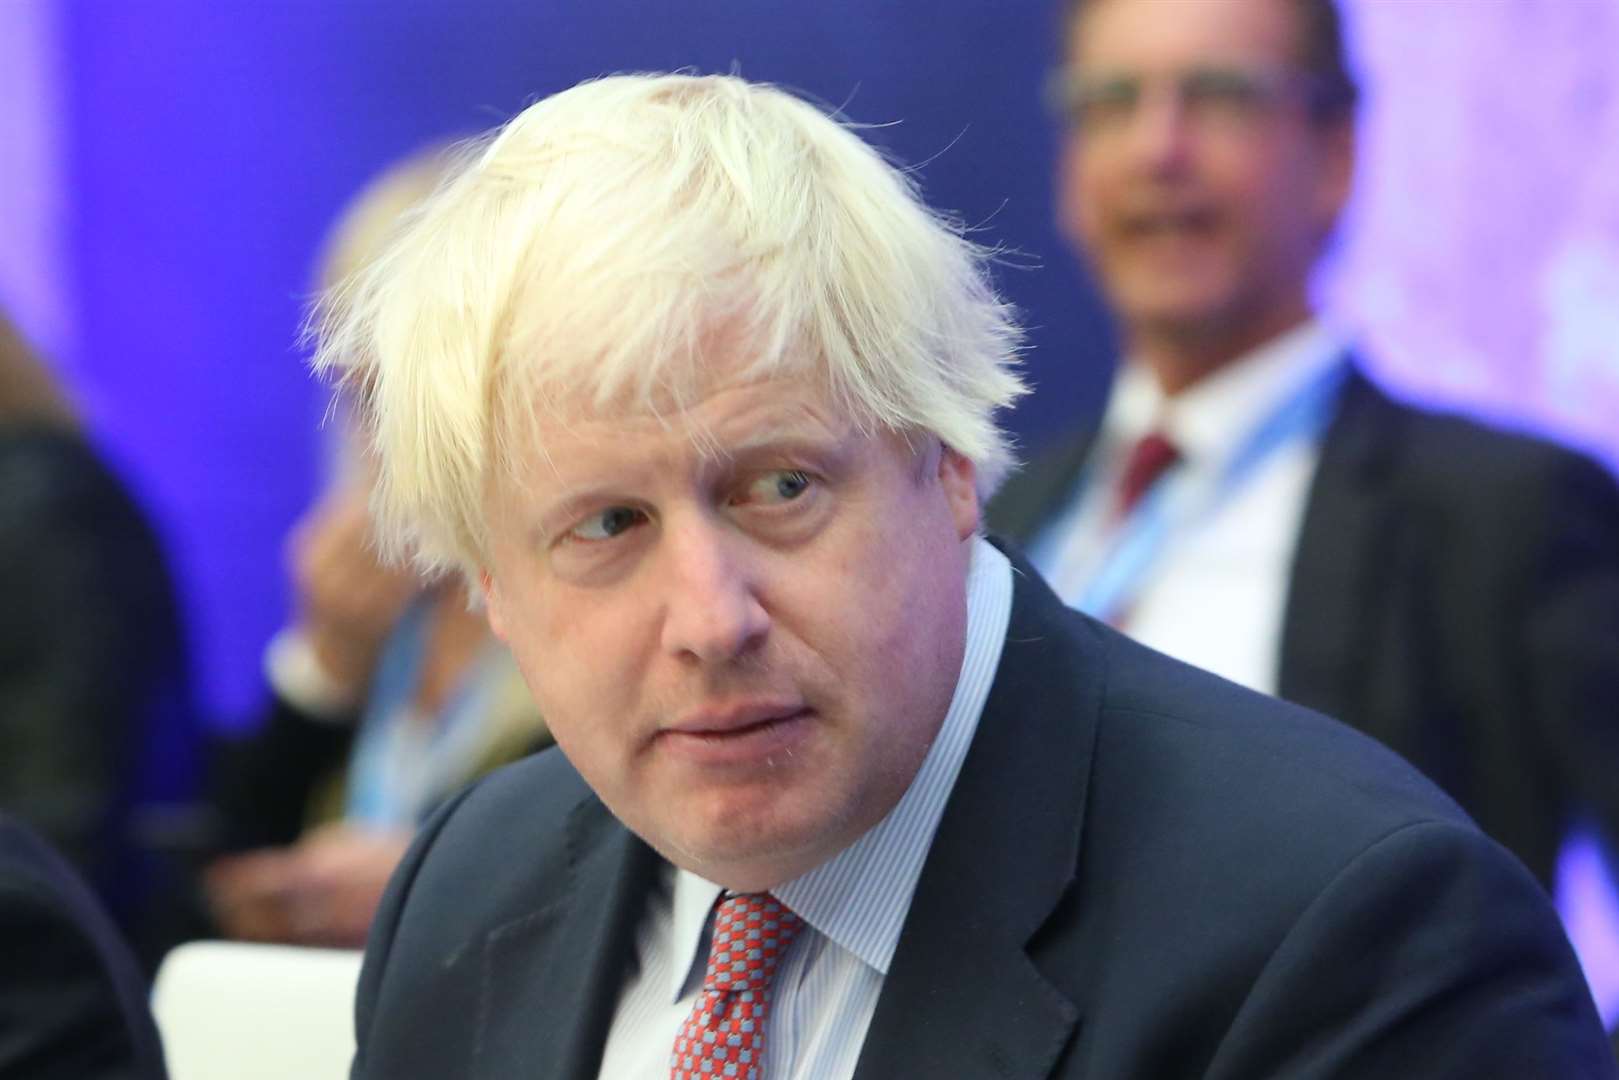 Boris Johnson is scheduled to attend the Climate Change Conference in Glasgow in November